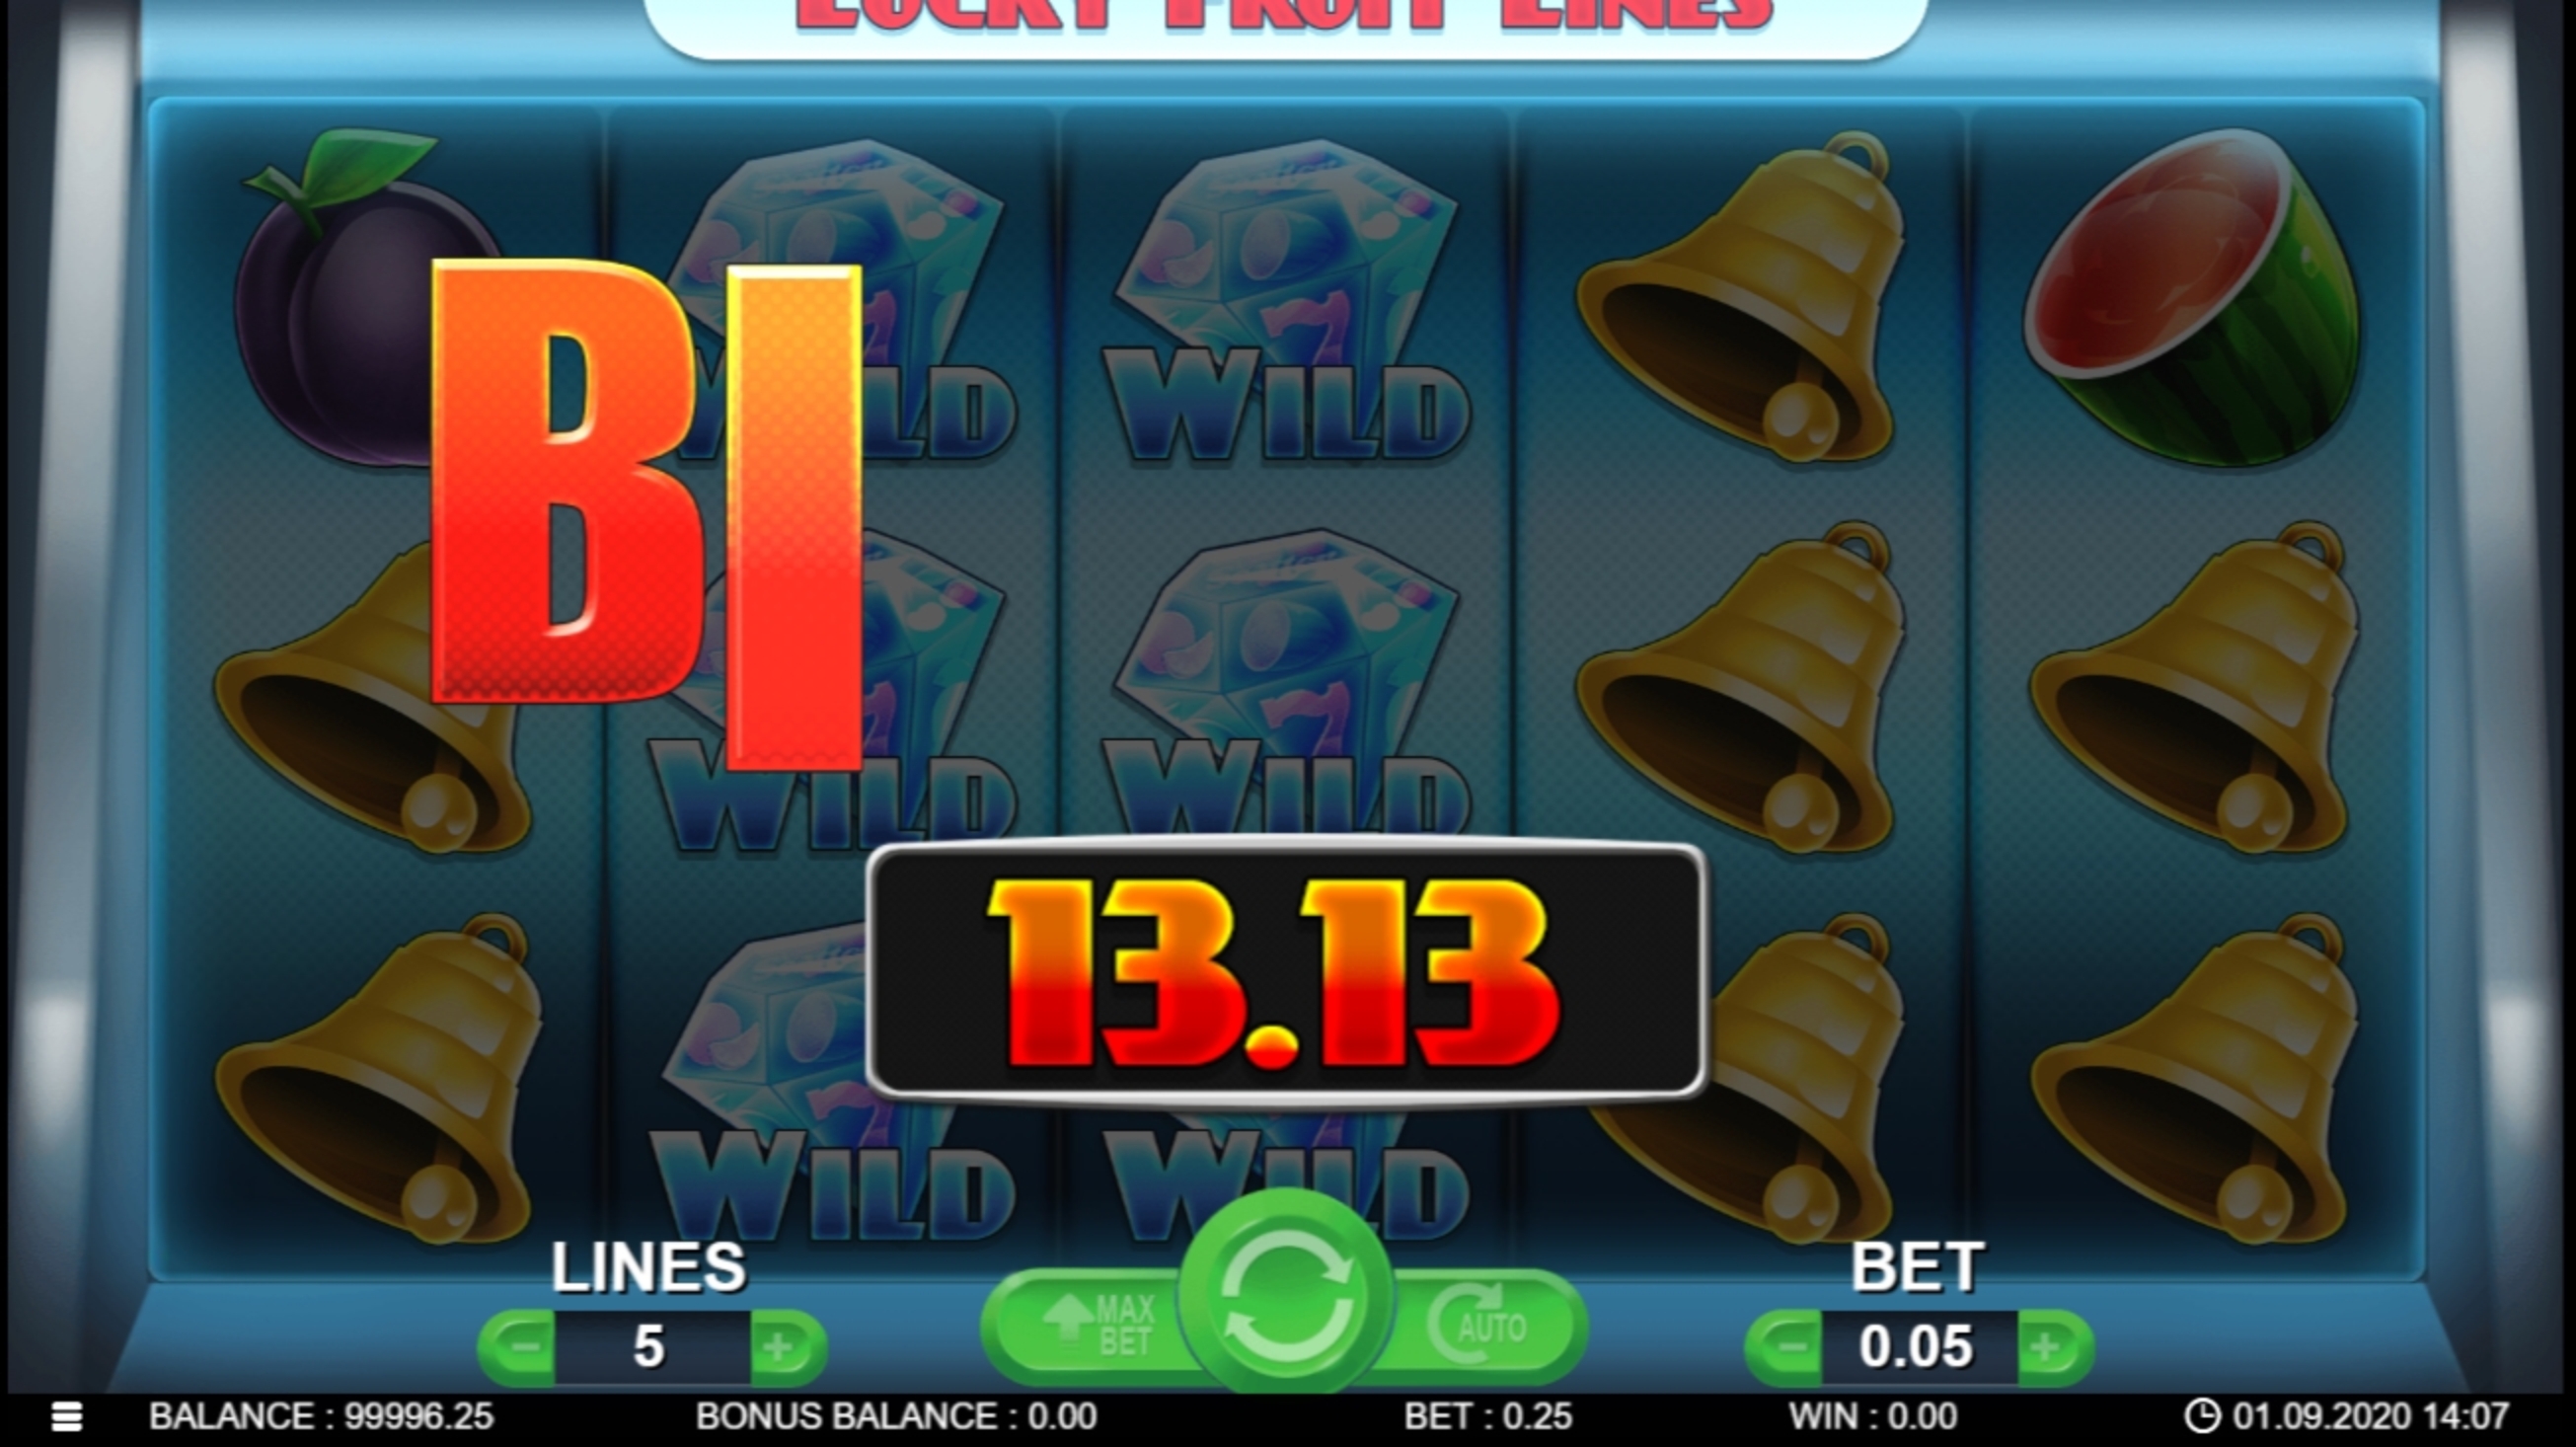 Win Money in Lucky Fruit Lines Free Slot Game by 7mojos